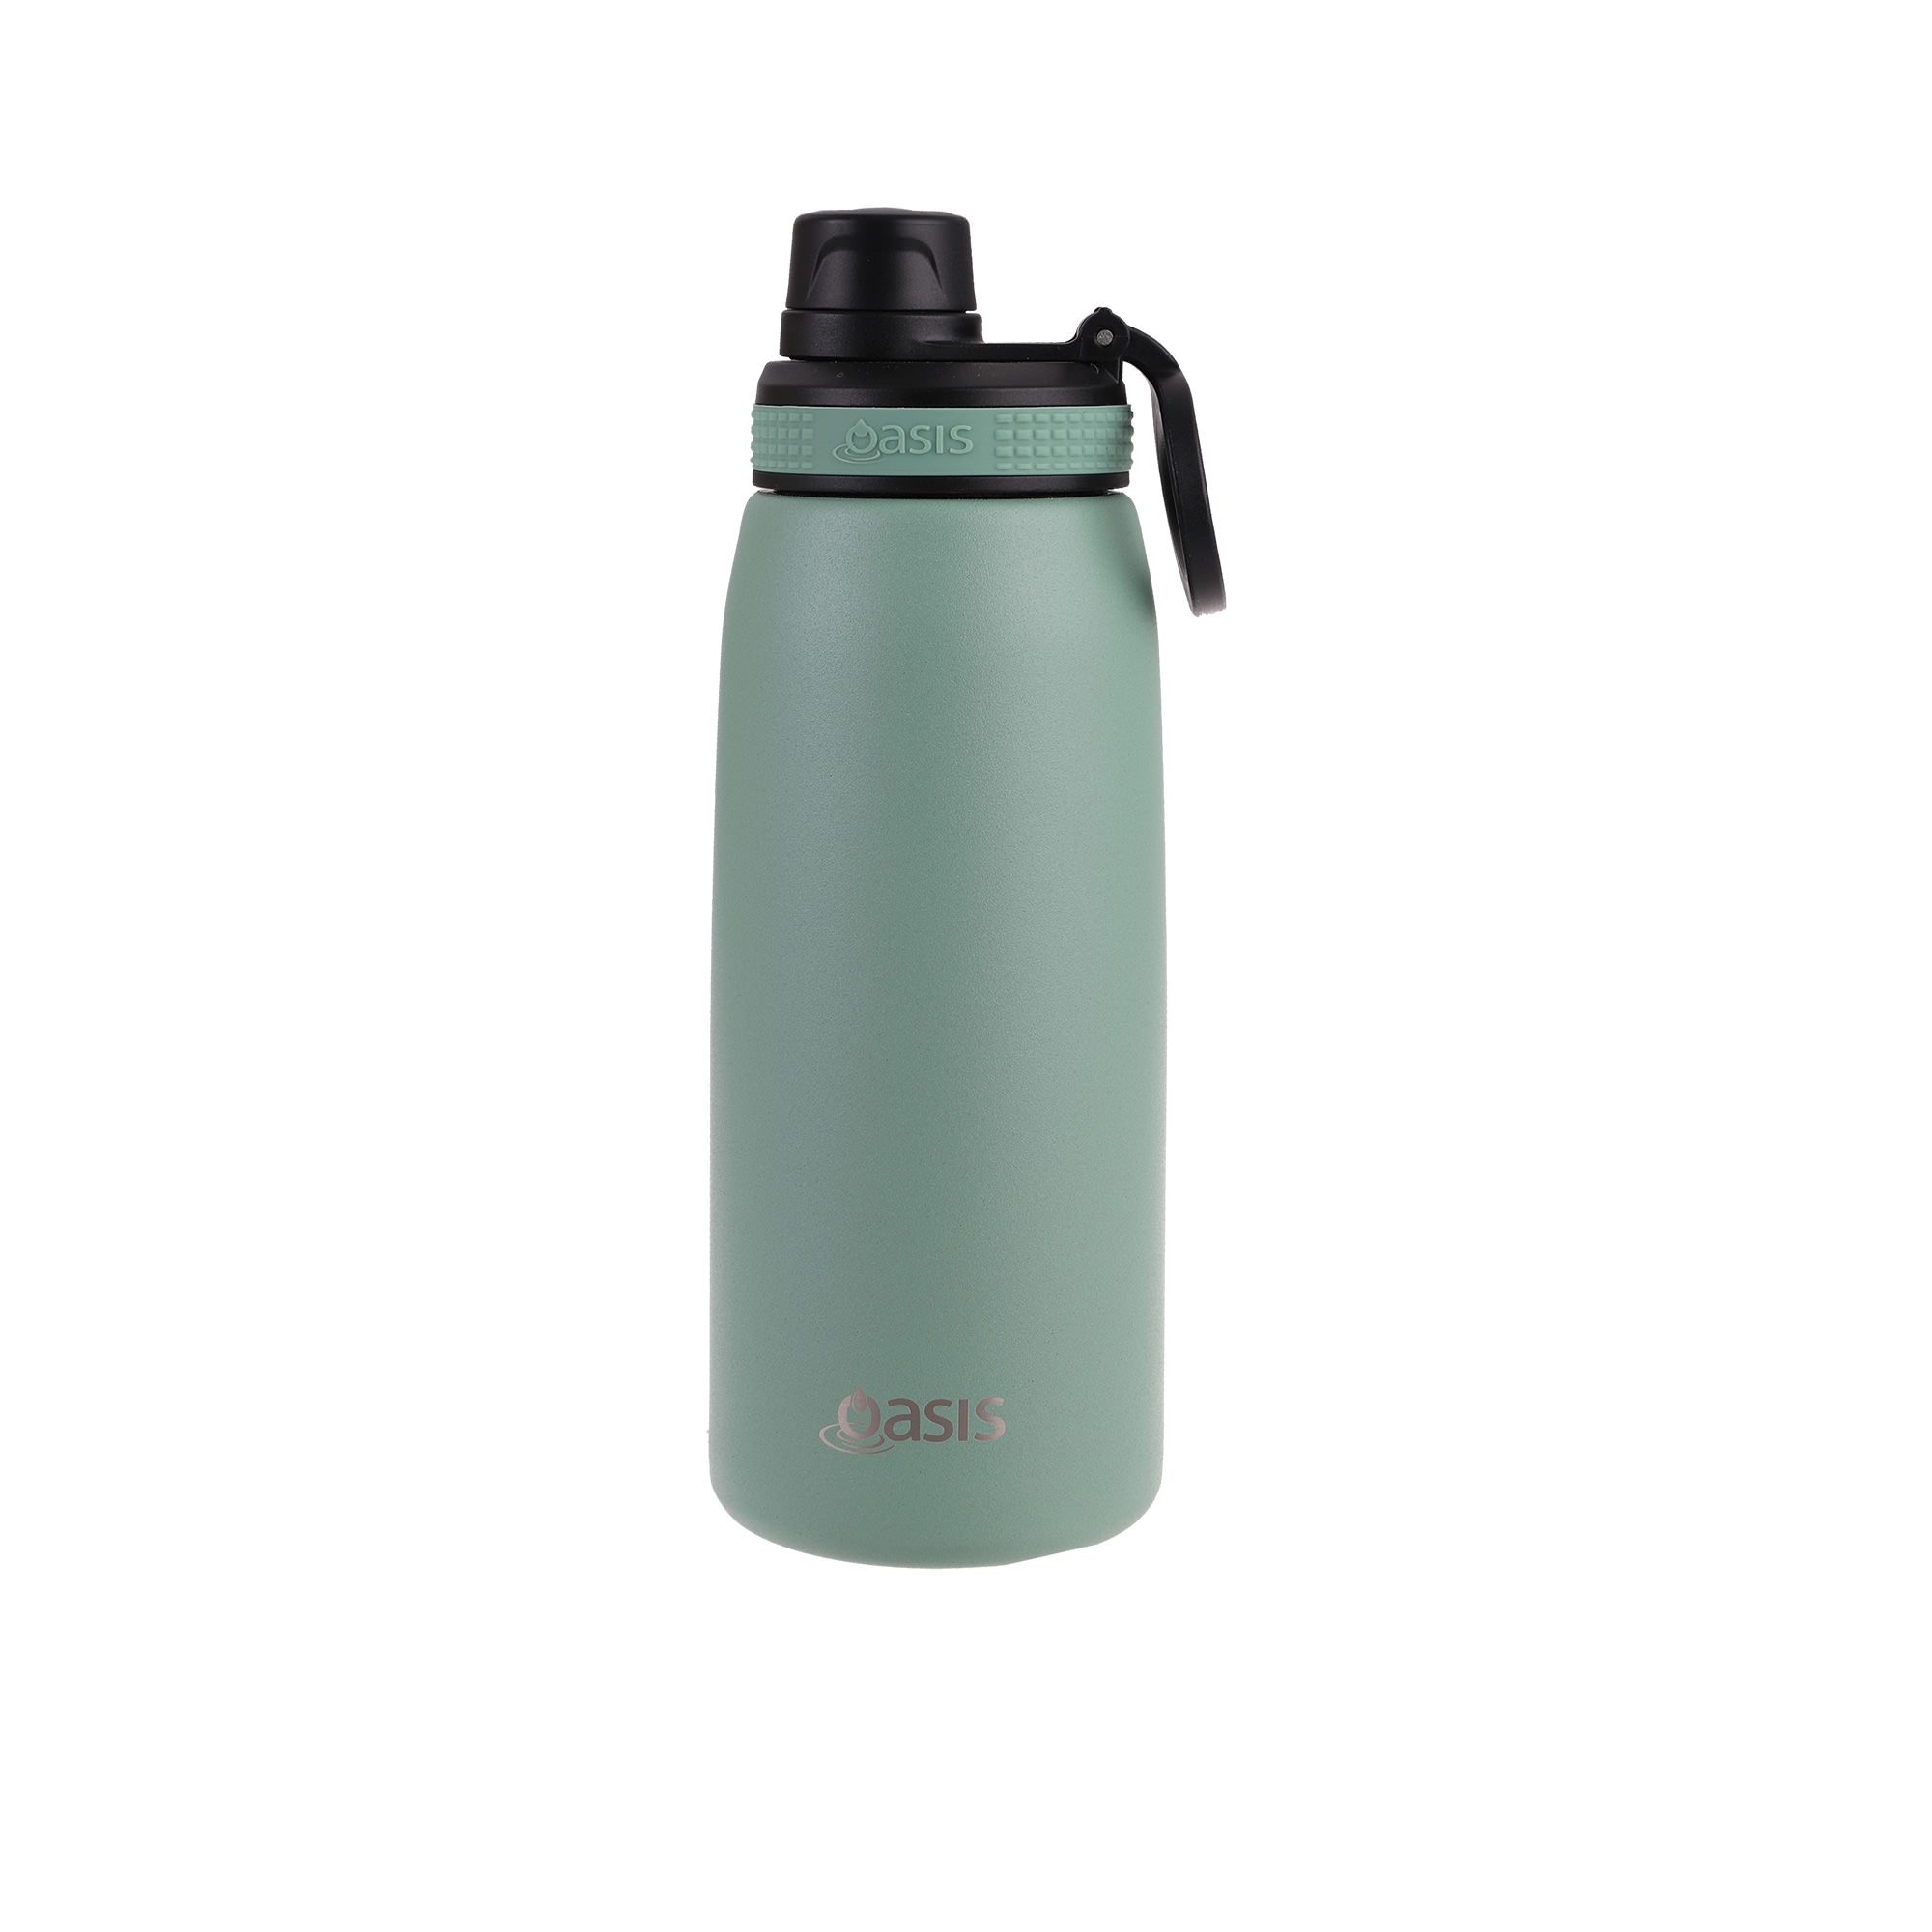 Oasis Double Wall Insulated Sports Bottle 780ml Sage Green Image 1